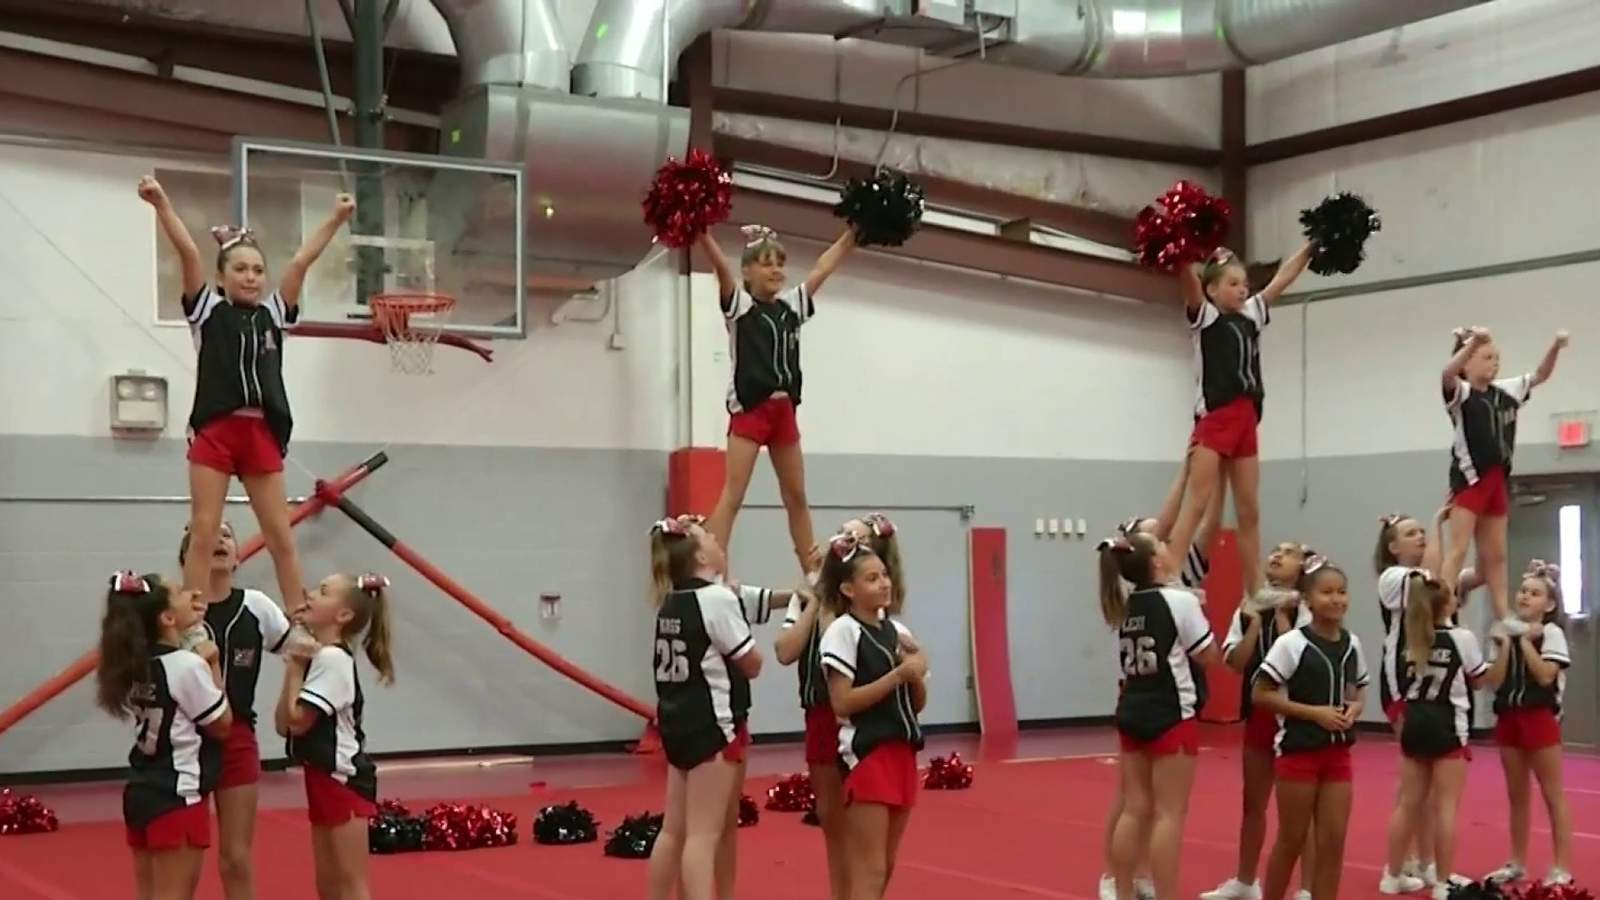 Ask a doctor: Preventing concussions in cheerleading